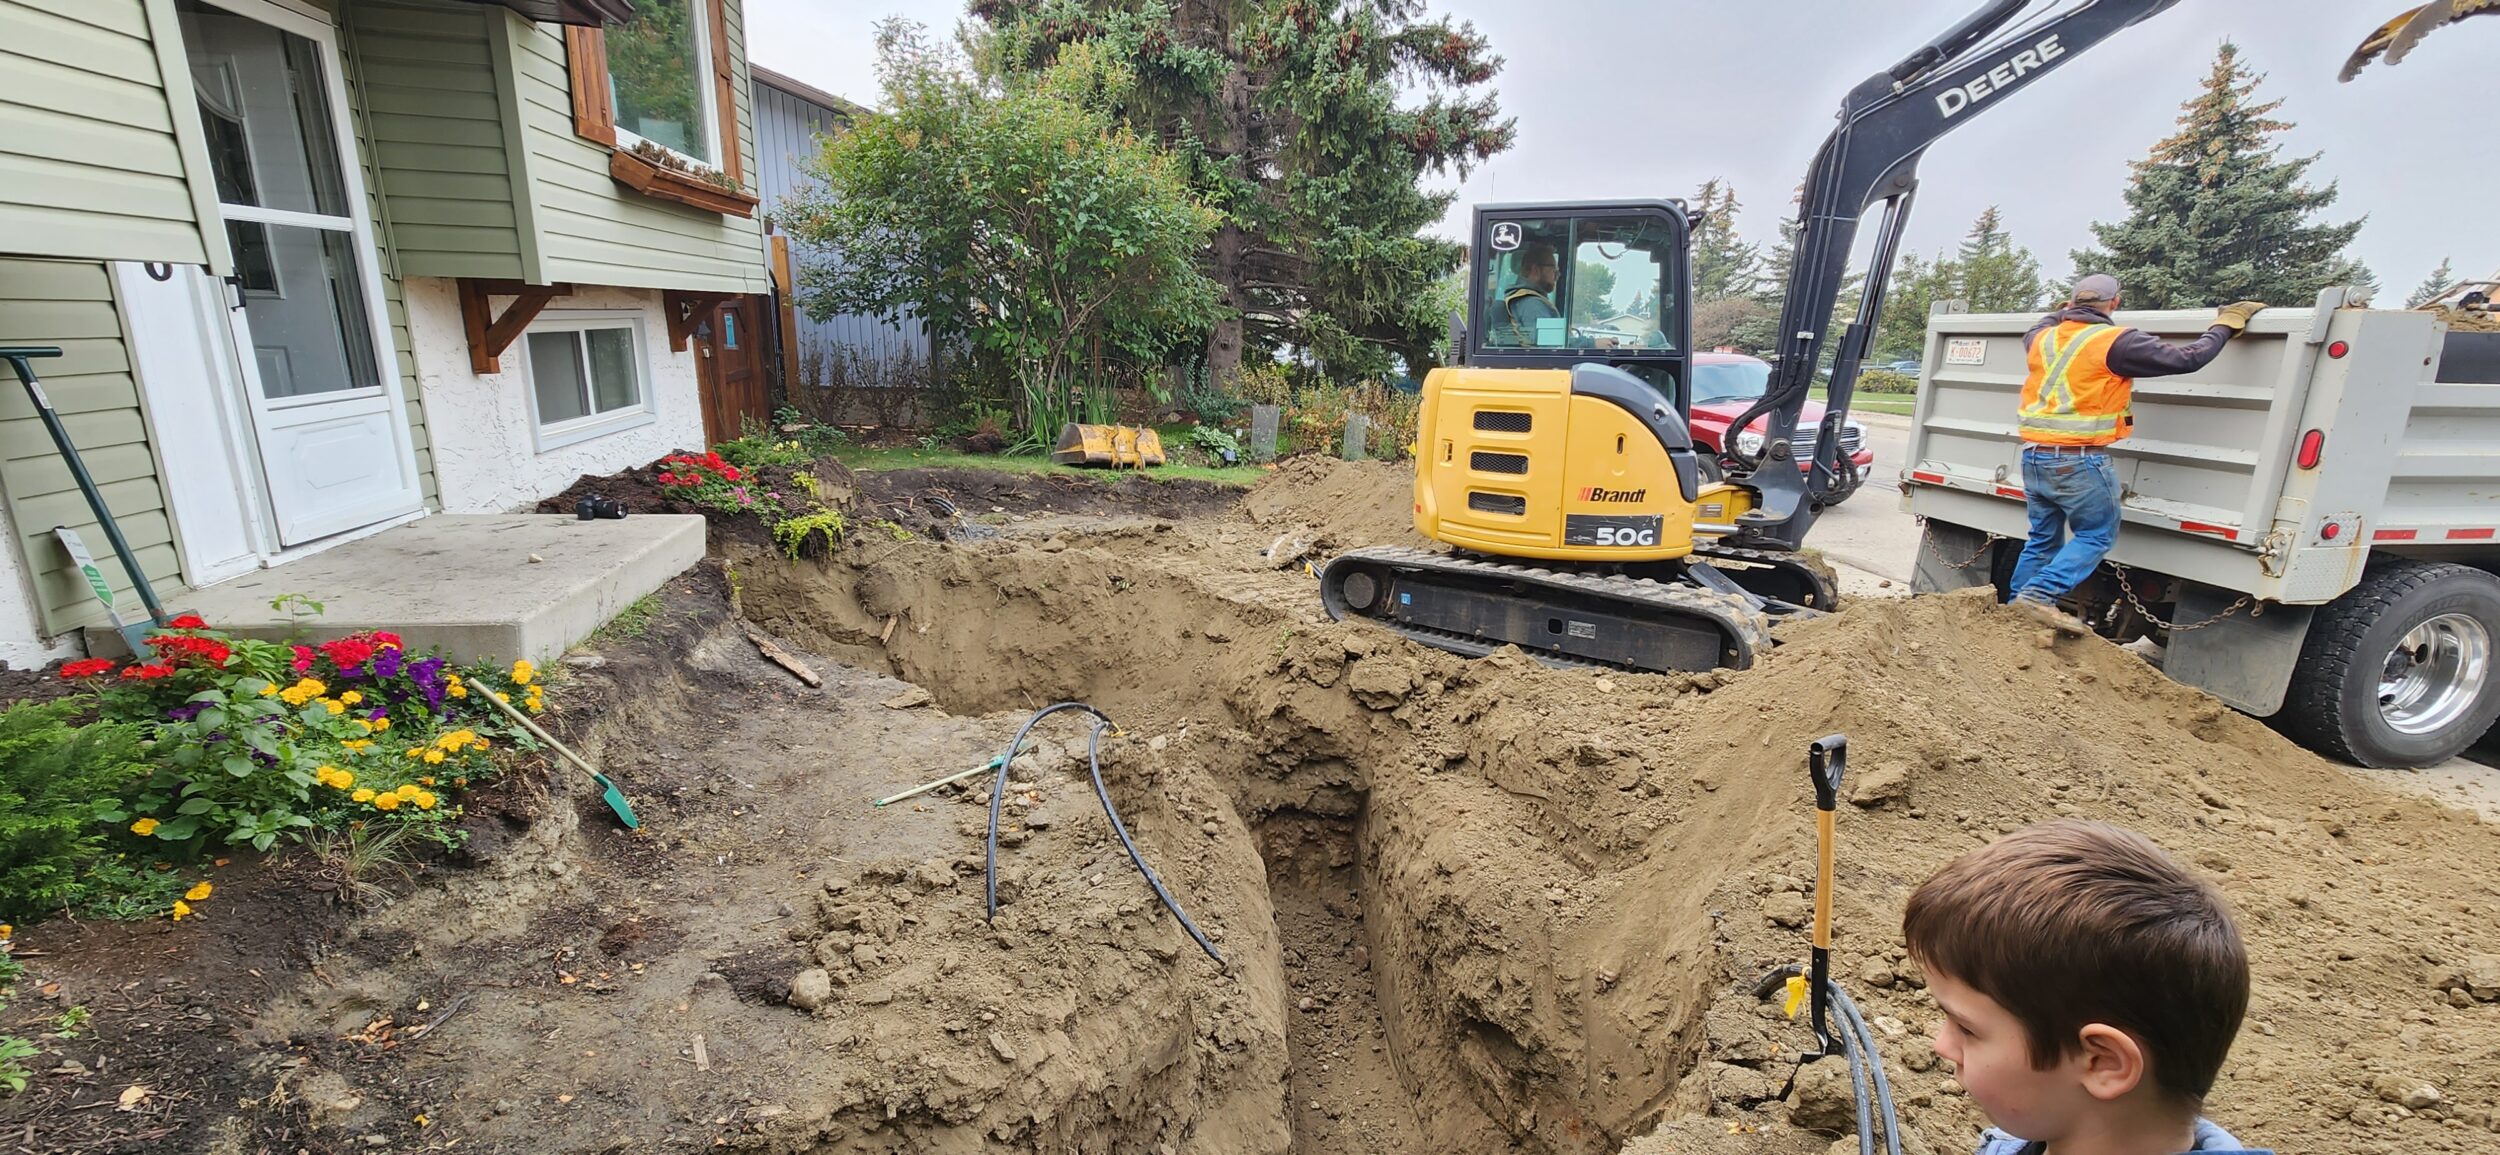 The installation of the geothermal heat pumps earthworks | Samantha Shannon
